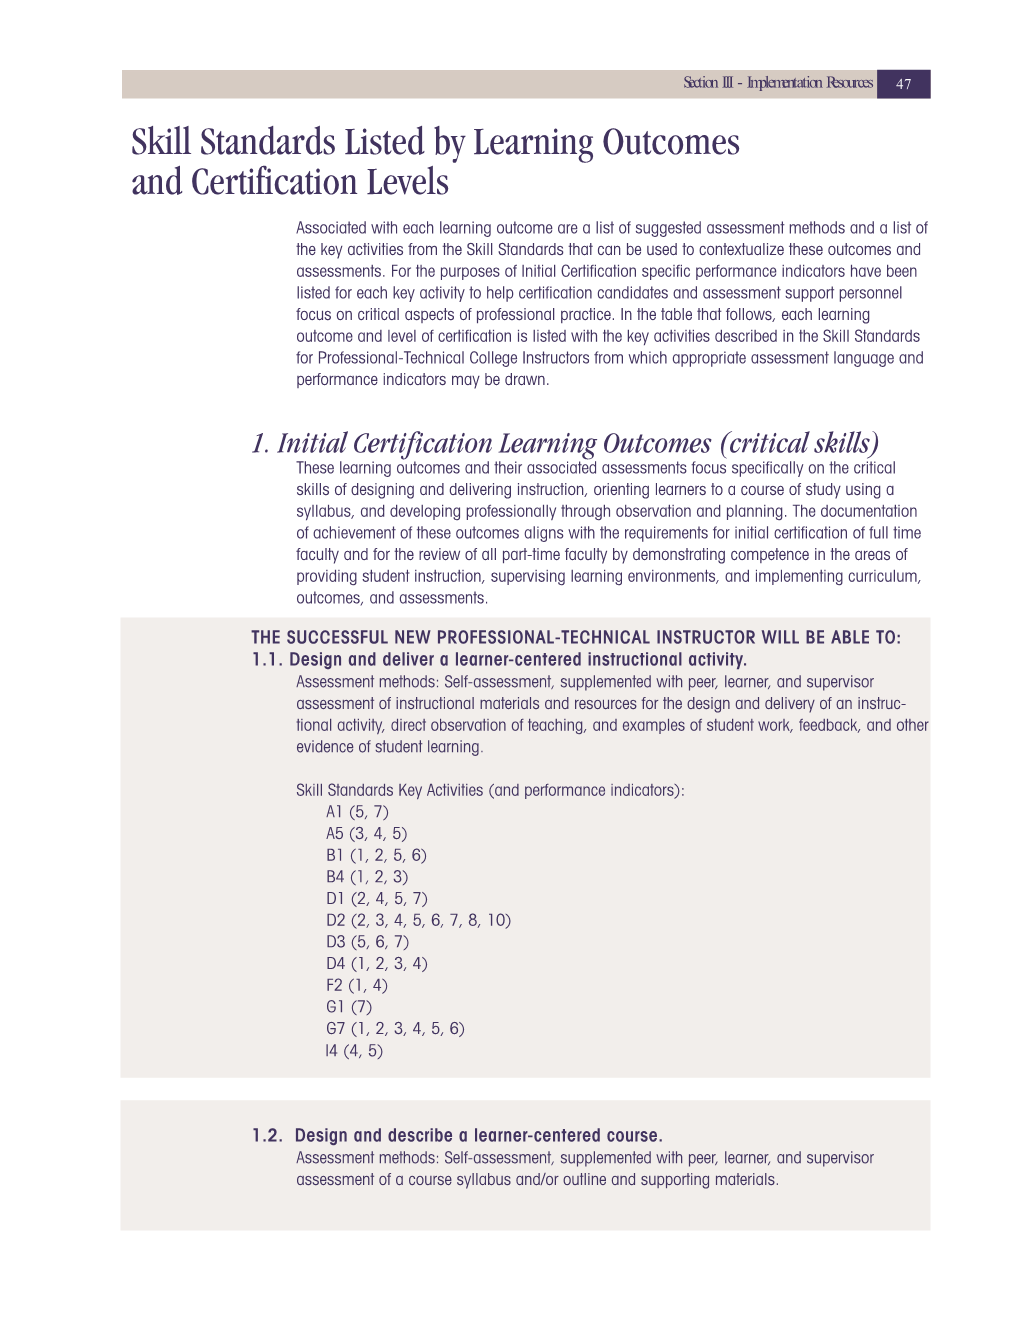 Skill Standards Listed by Learning Outcomes and Certification Levels